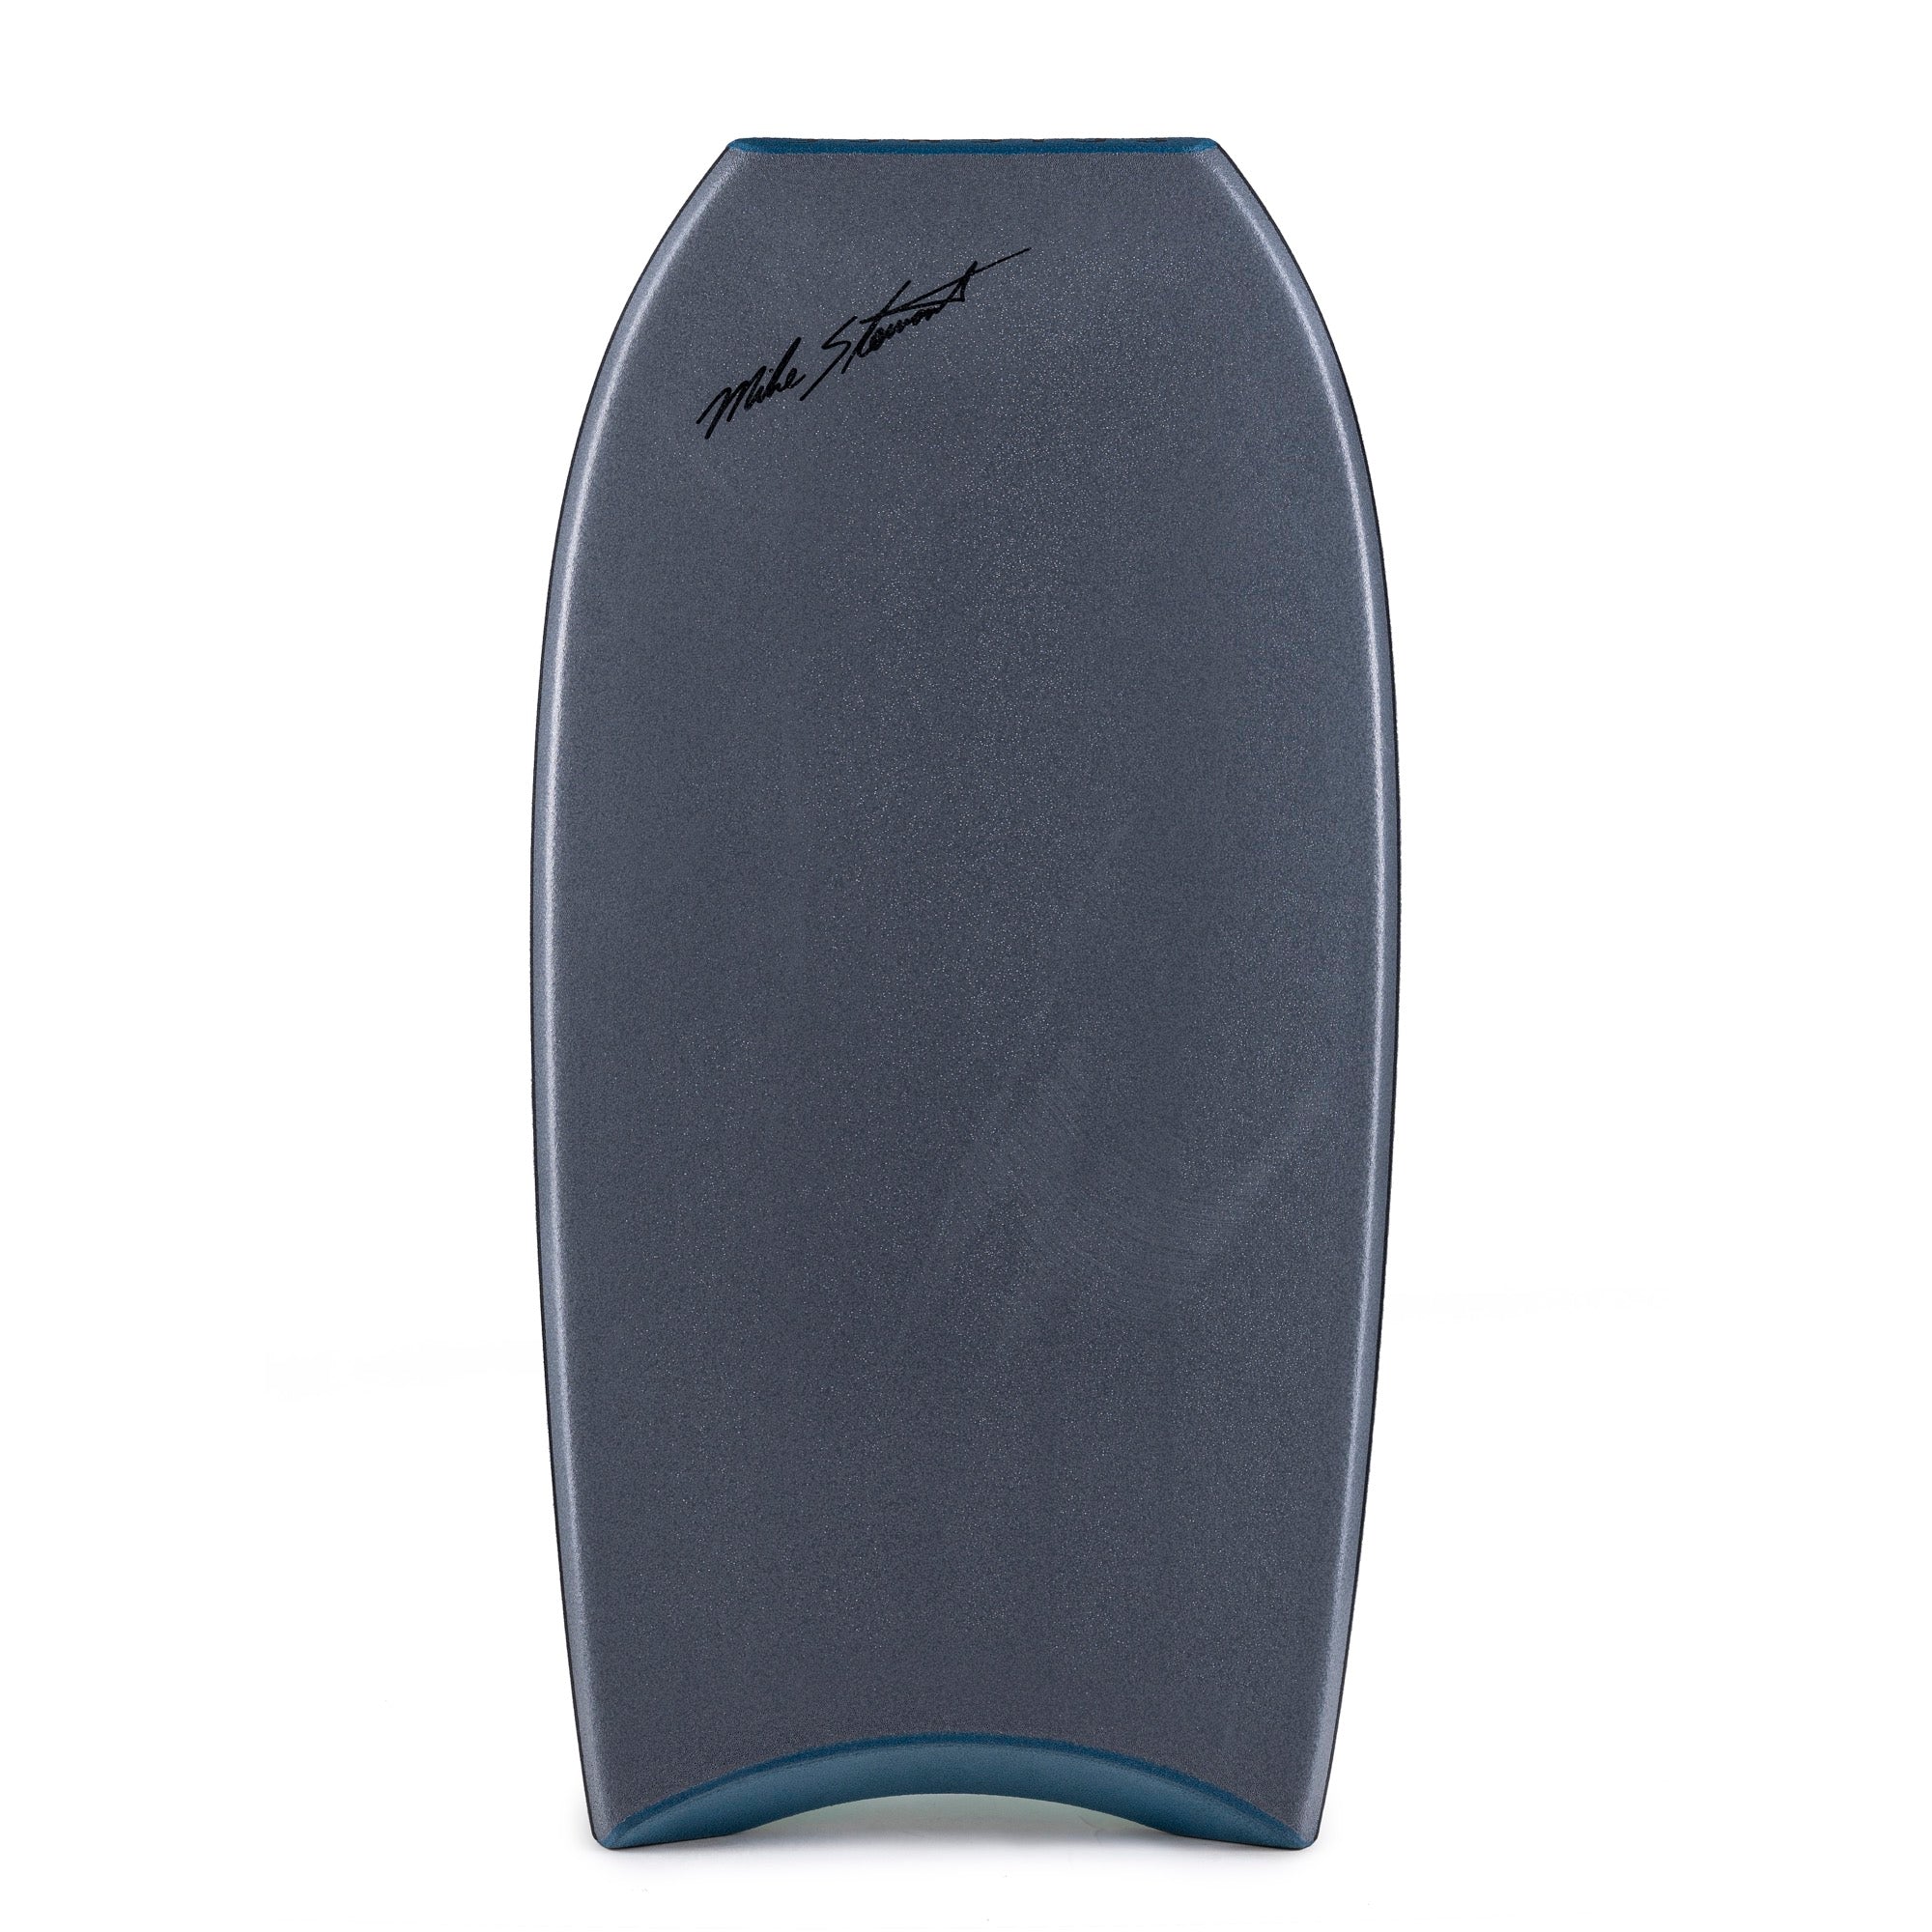 Science Bodyboard - Style Loaded F4 Quad Vent PP - Gun Metal / Turquoise